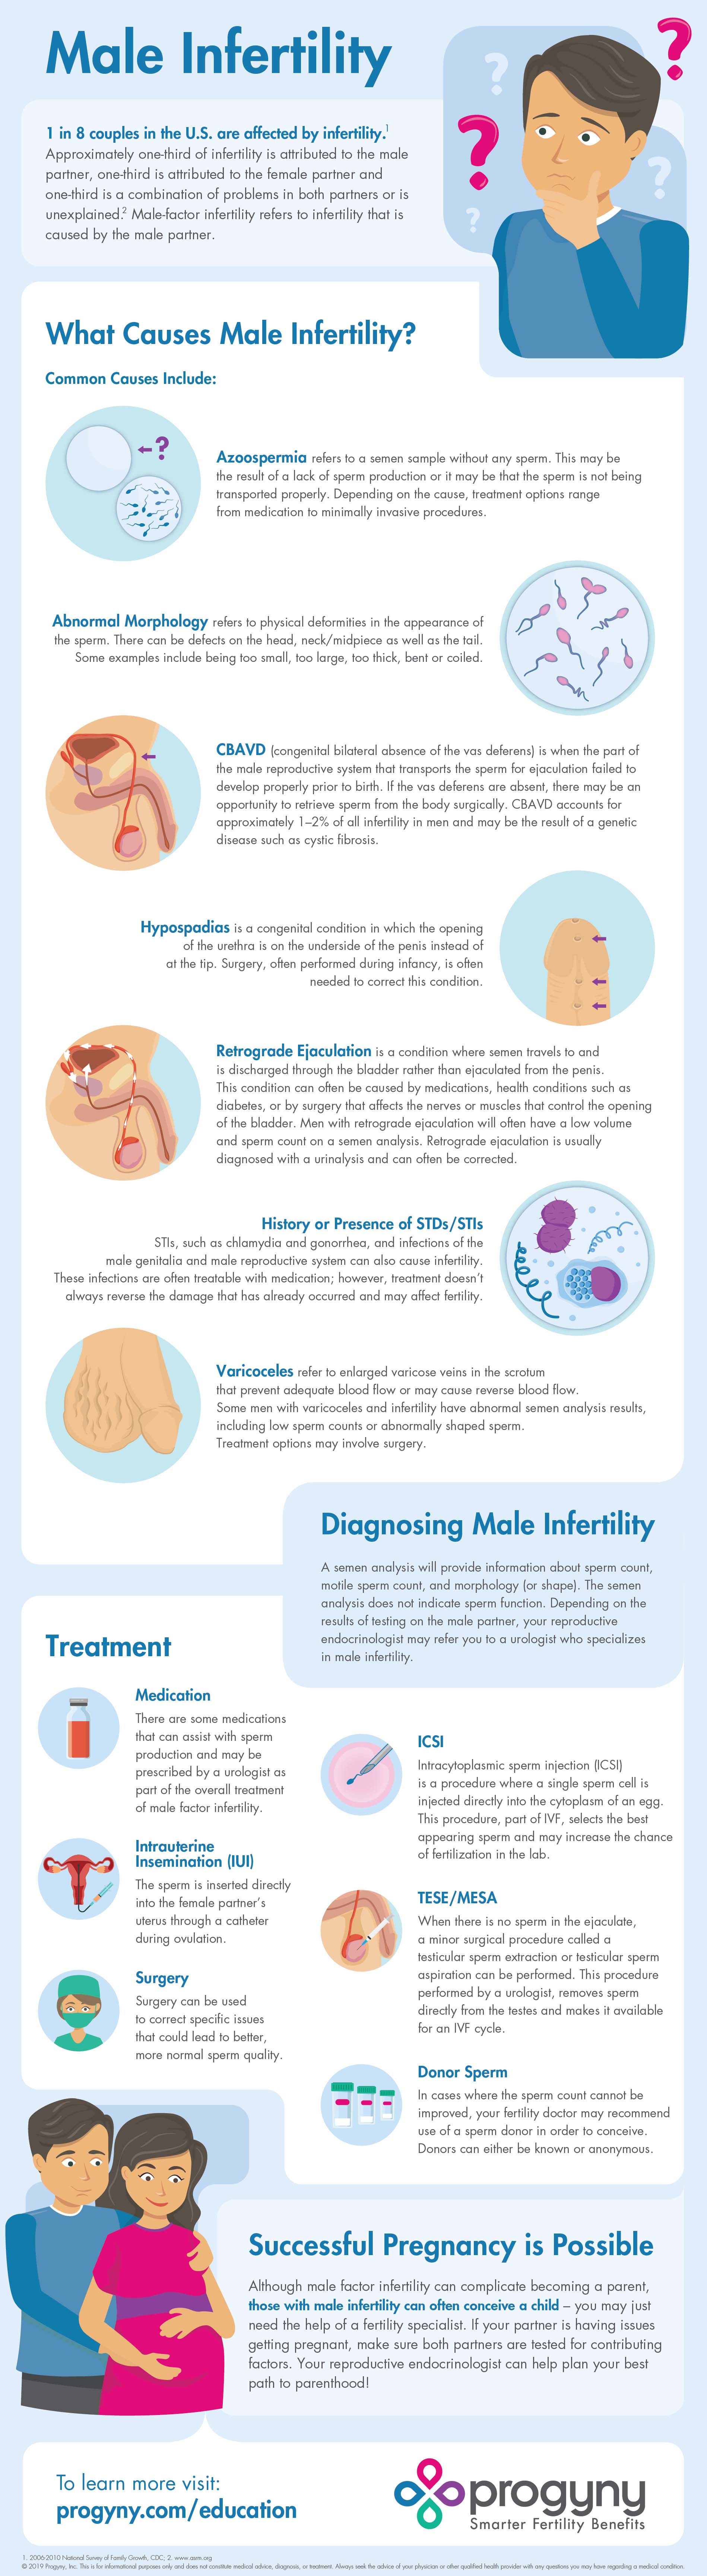 Male-Infertility-Infographic-12